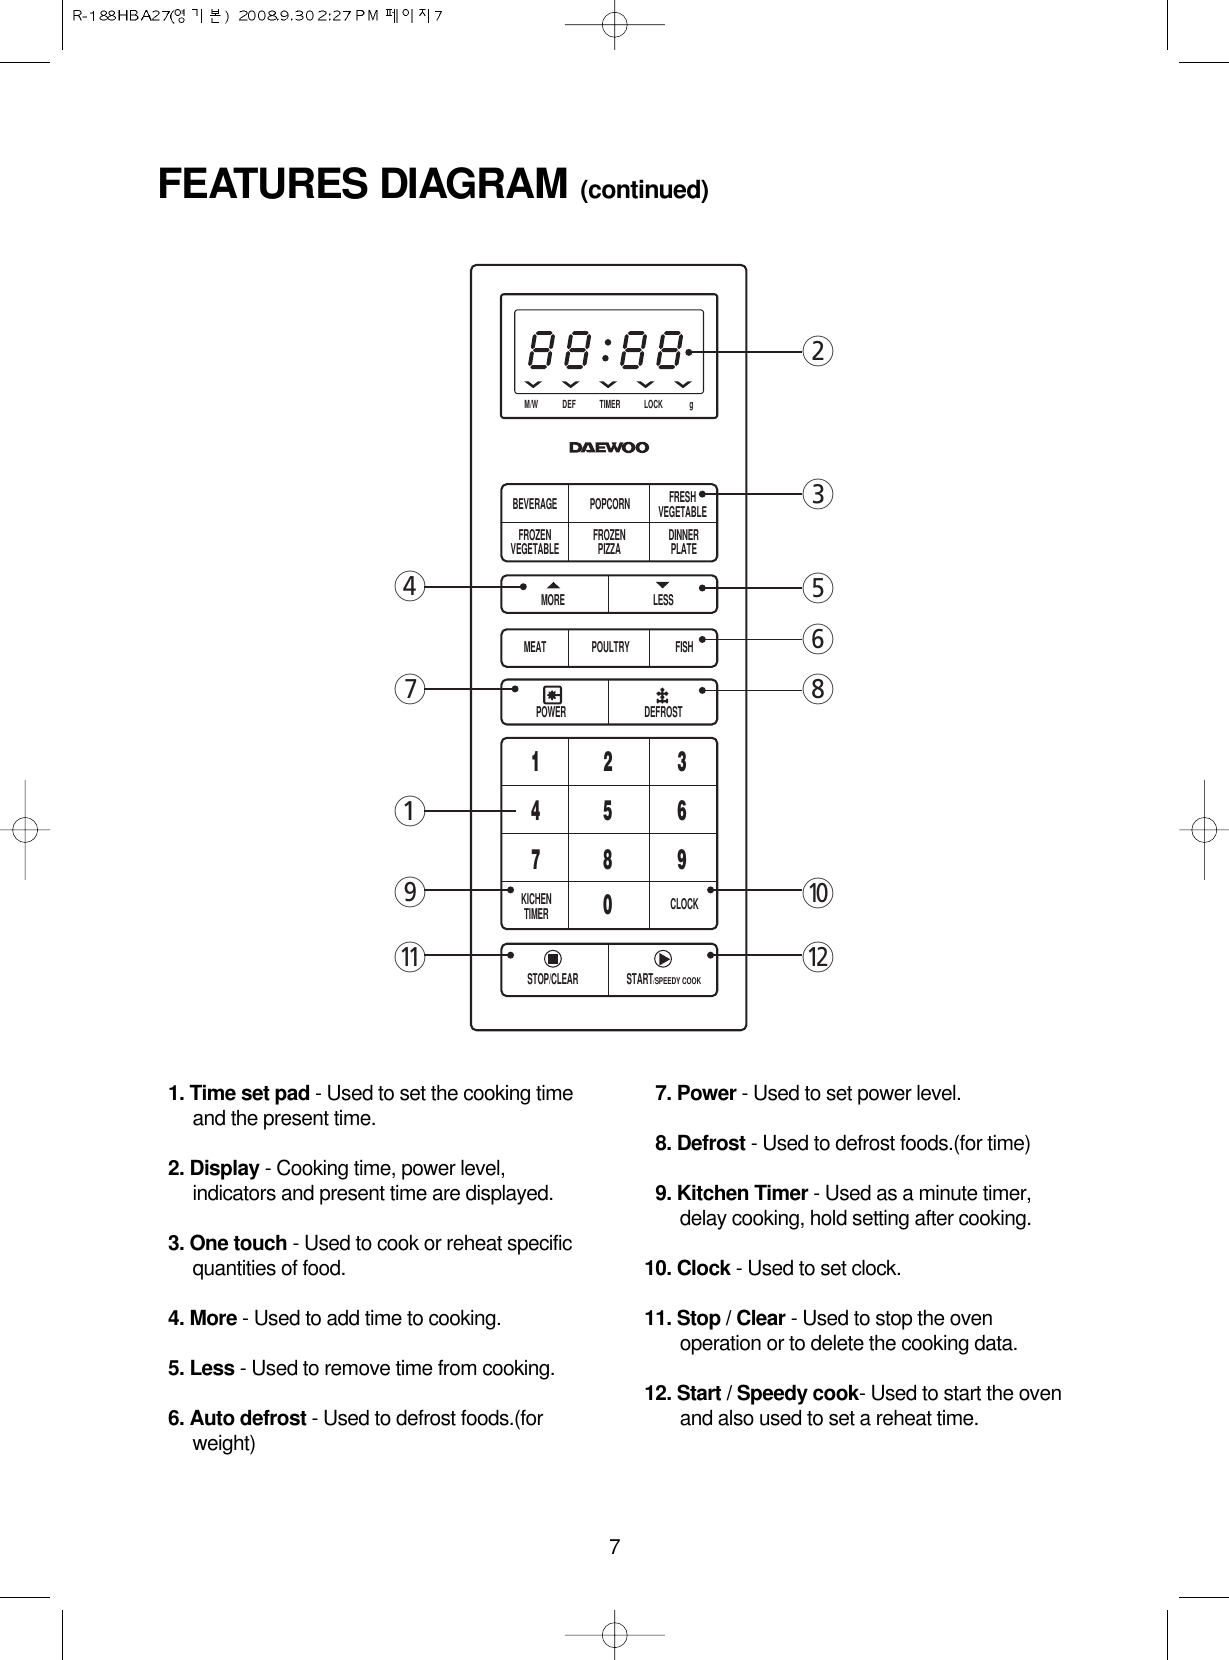 701. Time set pad - Used to set the cooking timeand the present time.02. Display - Cooking time, power level,indicators and present time are displayed.03. One touch - Used to cook or reheat specificquantities of food.04. More - Used to add time to cooking.05. Less - Used to remove time from cooking.06. Auto defrost - Used to defrost foods.(forweight)07. Power - Used to set power level.08. Defrost - Used to defrost foods.(for time)09. Kitchen Timer - Used as a minute timer,delay cooking, hold setting after cooking.10. Clock - Used to set clock.11. Stop / Clear - Used to stop the ovenoperation or to delete the cooking data.12. Start / Speedy cook- Used to start the ovenand also used to set a reheat time.FEATURES DIAGRAM (continued)KICHENTIMER CLOCKPOWERSTOP/CLEAR START/SPEEDY COOKMEATMOREM/W DEF                     TIMER LOCK gBEVERAGE POPCORN FRESHVEGETABLEFROZENVEGETABLE FROZENPIZZA DINNERPLATELESSPOULTRY FISHDEFROST4235680w719q1234567890